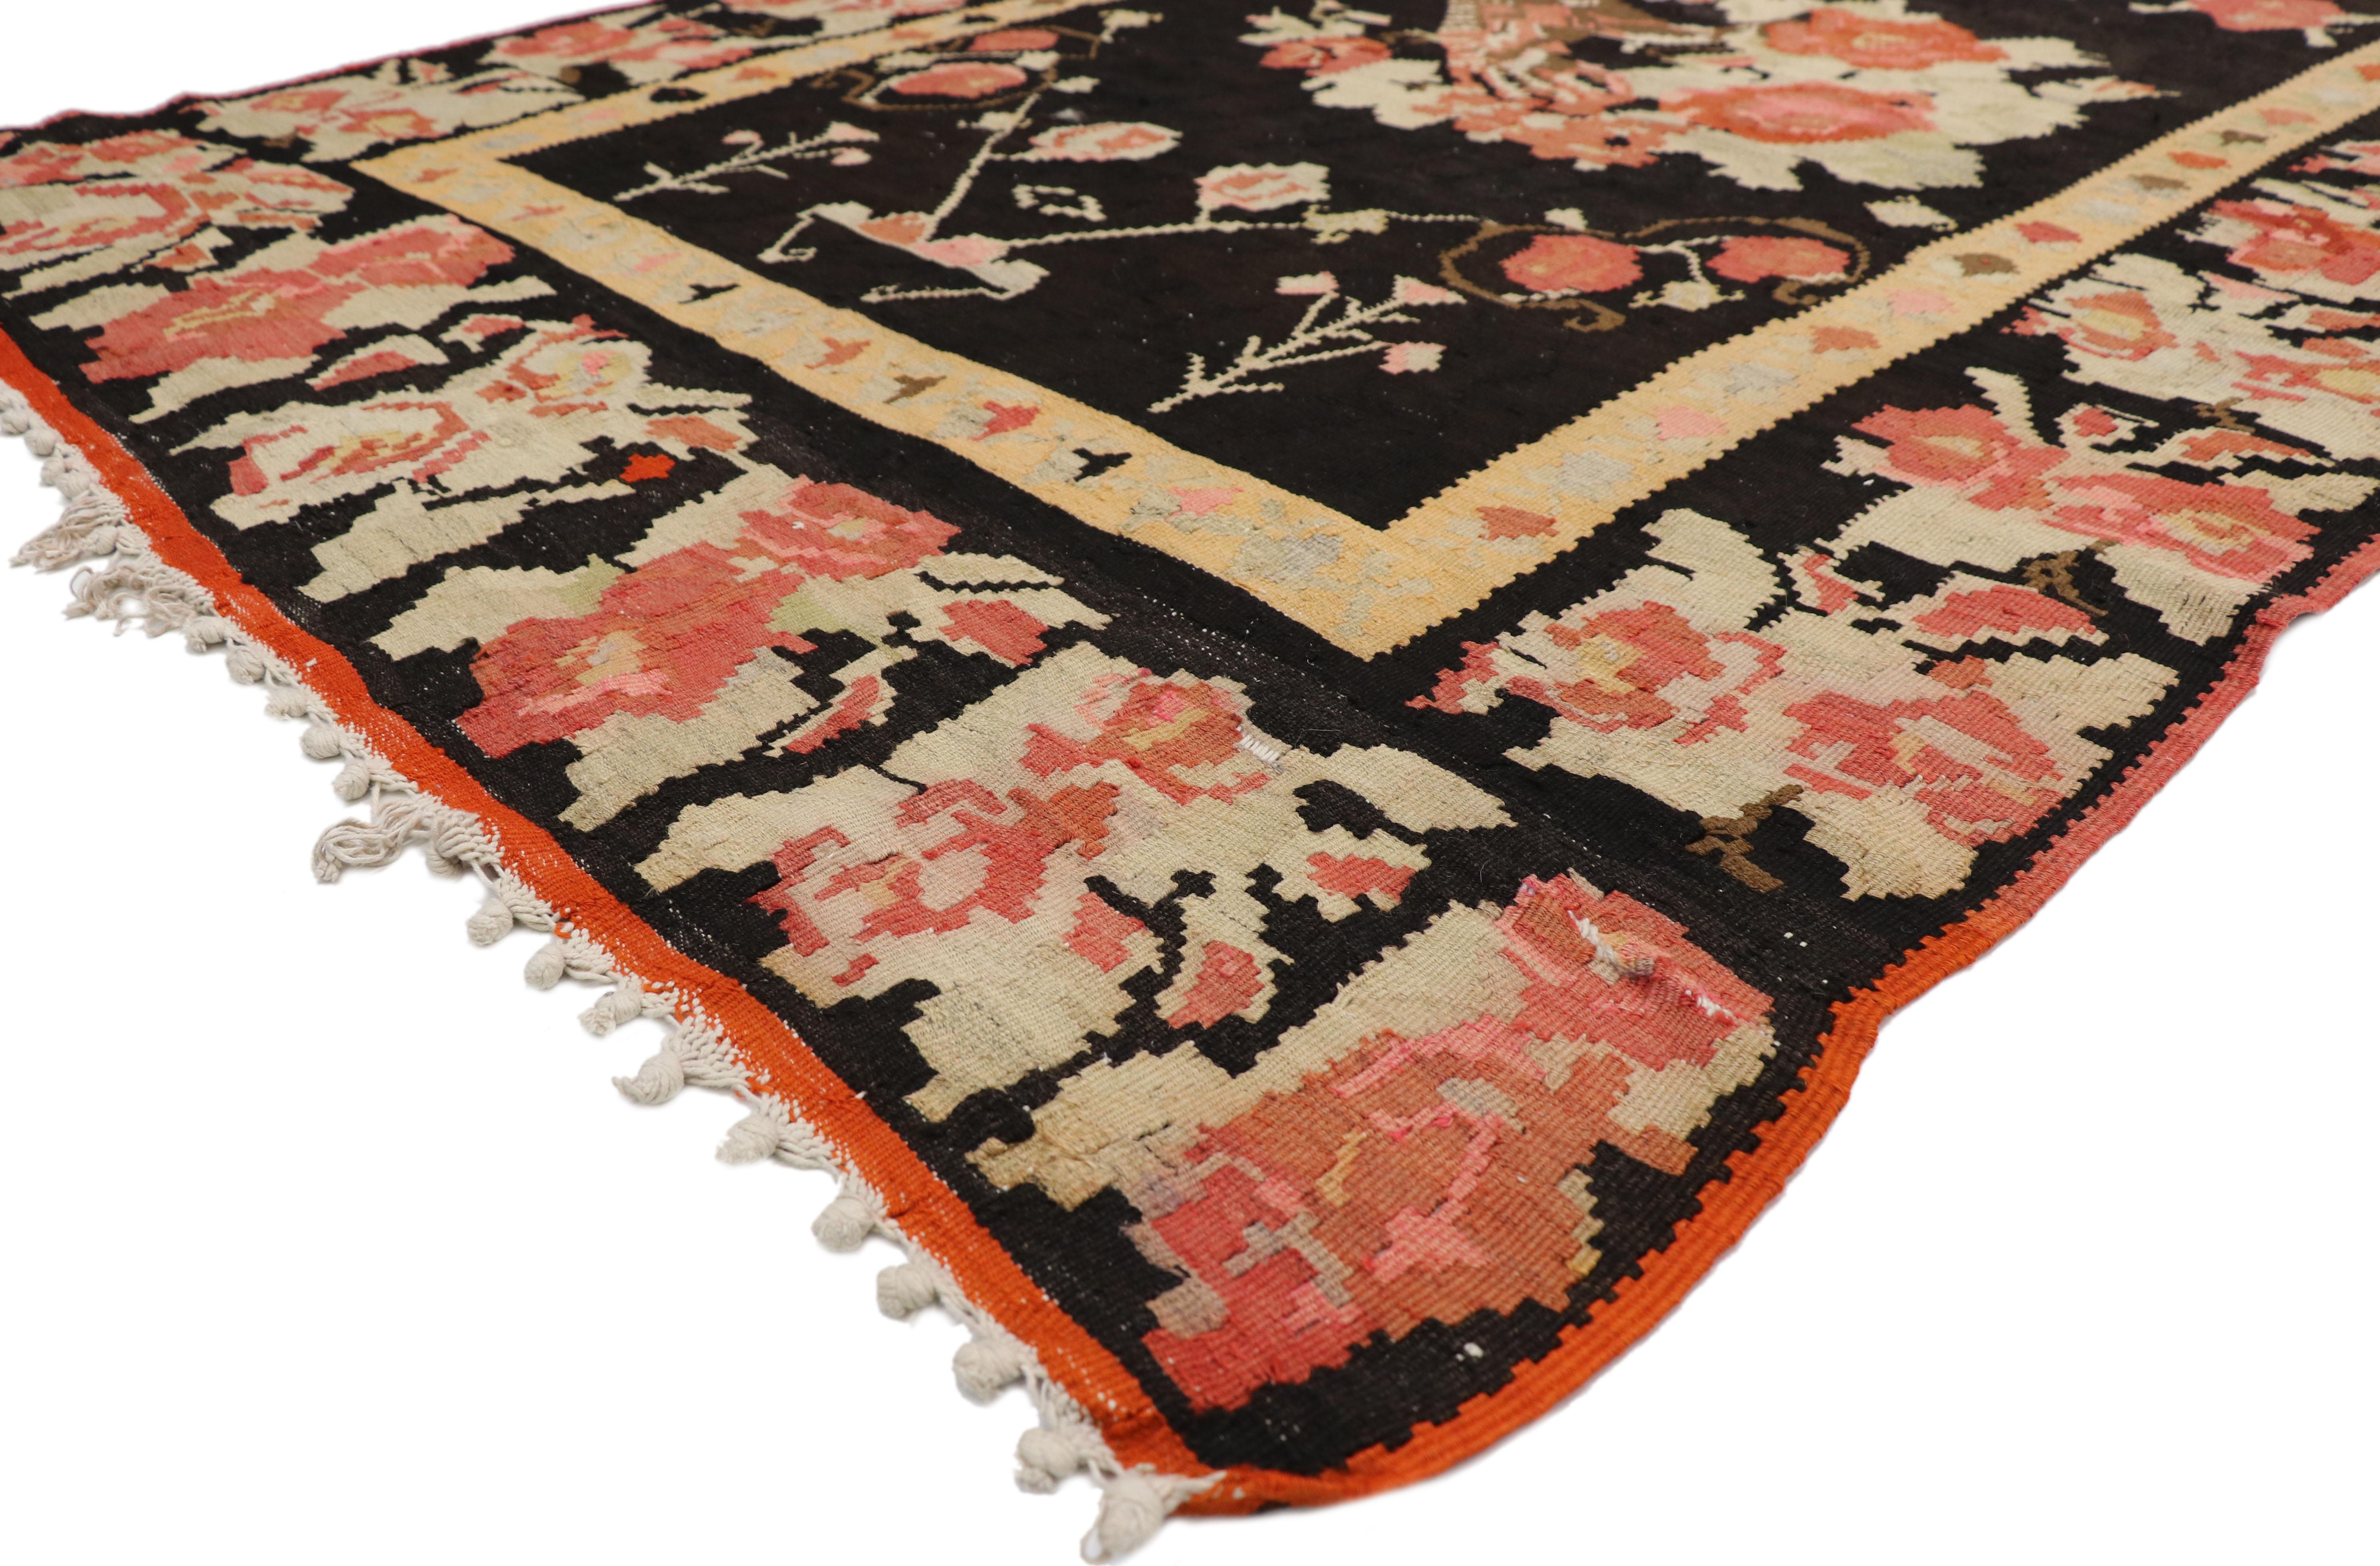 77346 Vintage Floral Turkish Kilim Rug with Chintz Style and Bessarabian Rose Design, Flat-weave Rose Kilim Gallery Rug 05'04 x 12'05. Drawing inspiration from Mario Buatta and Chintz style, this hand-woven floral Turkish kilim rug gives a lively